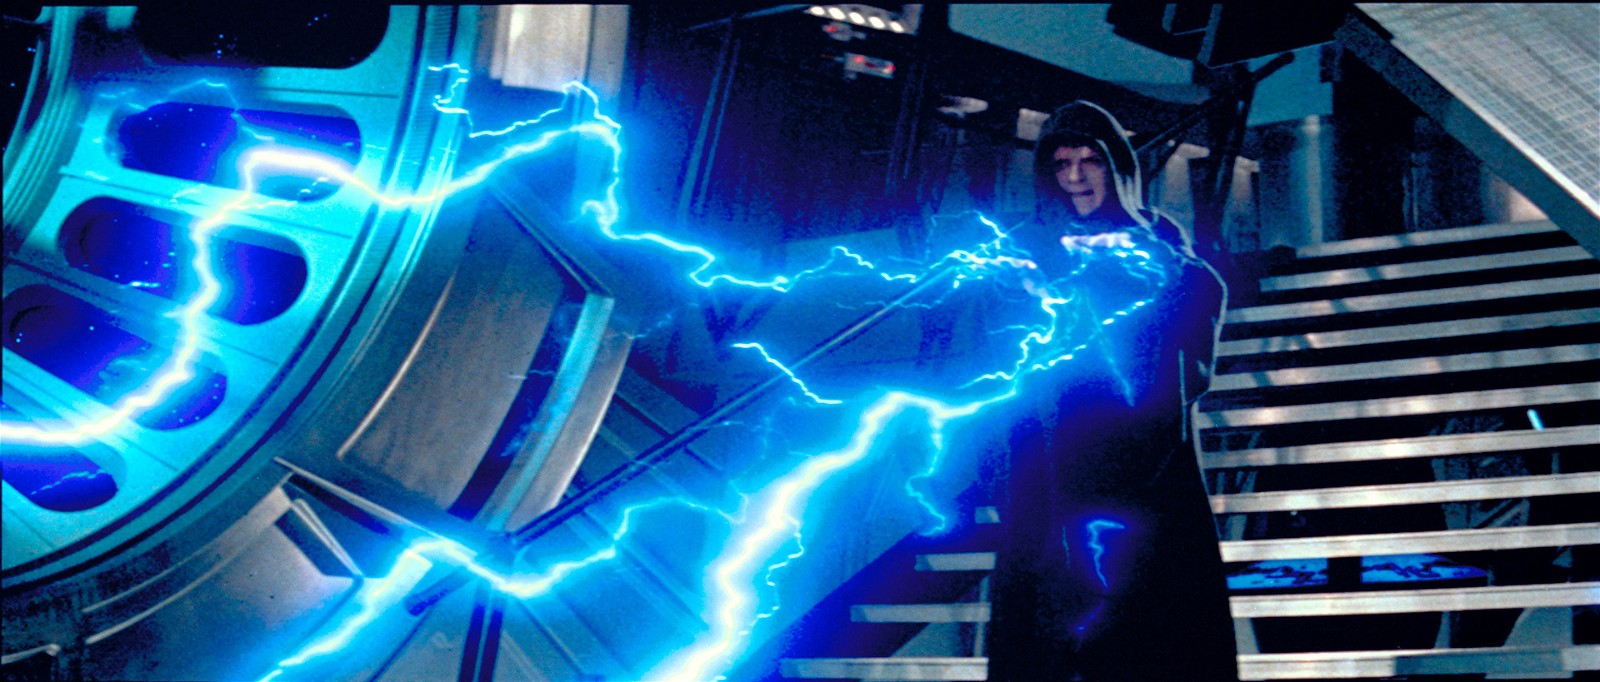 The Emperor (Palpatine) takes aim and uses Force lightning, which eminates from his fingertips, in order to strike down Luke Skywalker.